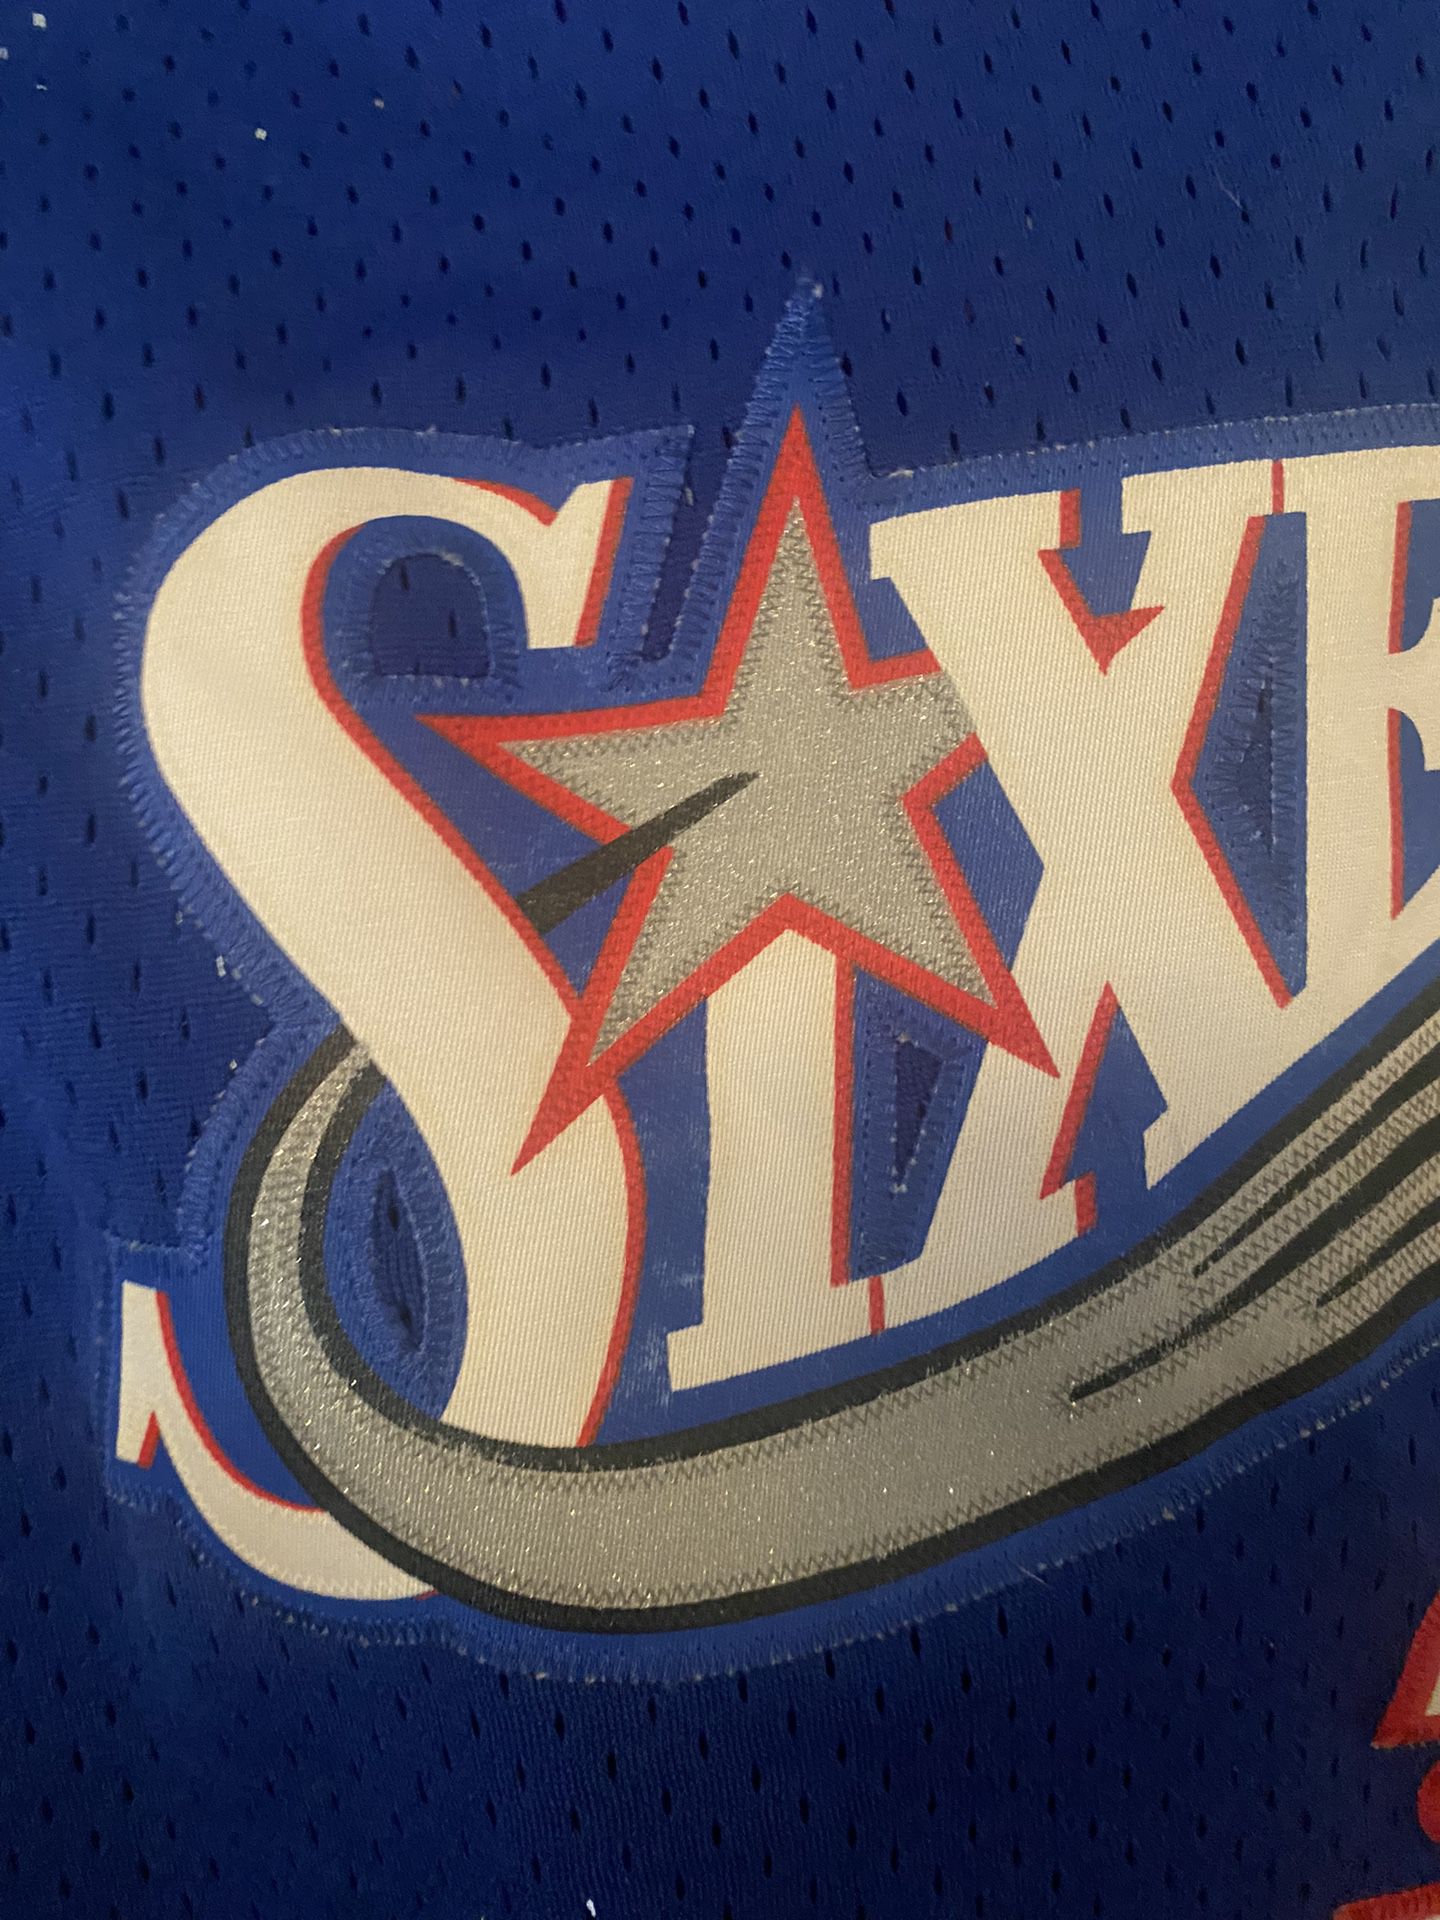 NBA Reebok Philadelphia 76ers Allen Iverson Blue Jersey Youth Size Medium  10-12 Pre-owned for Sale in Maywood, IL - OfferUp